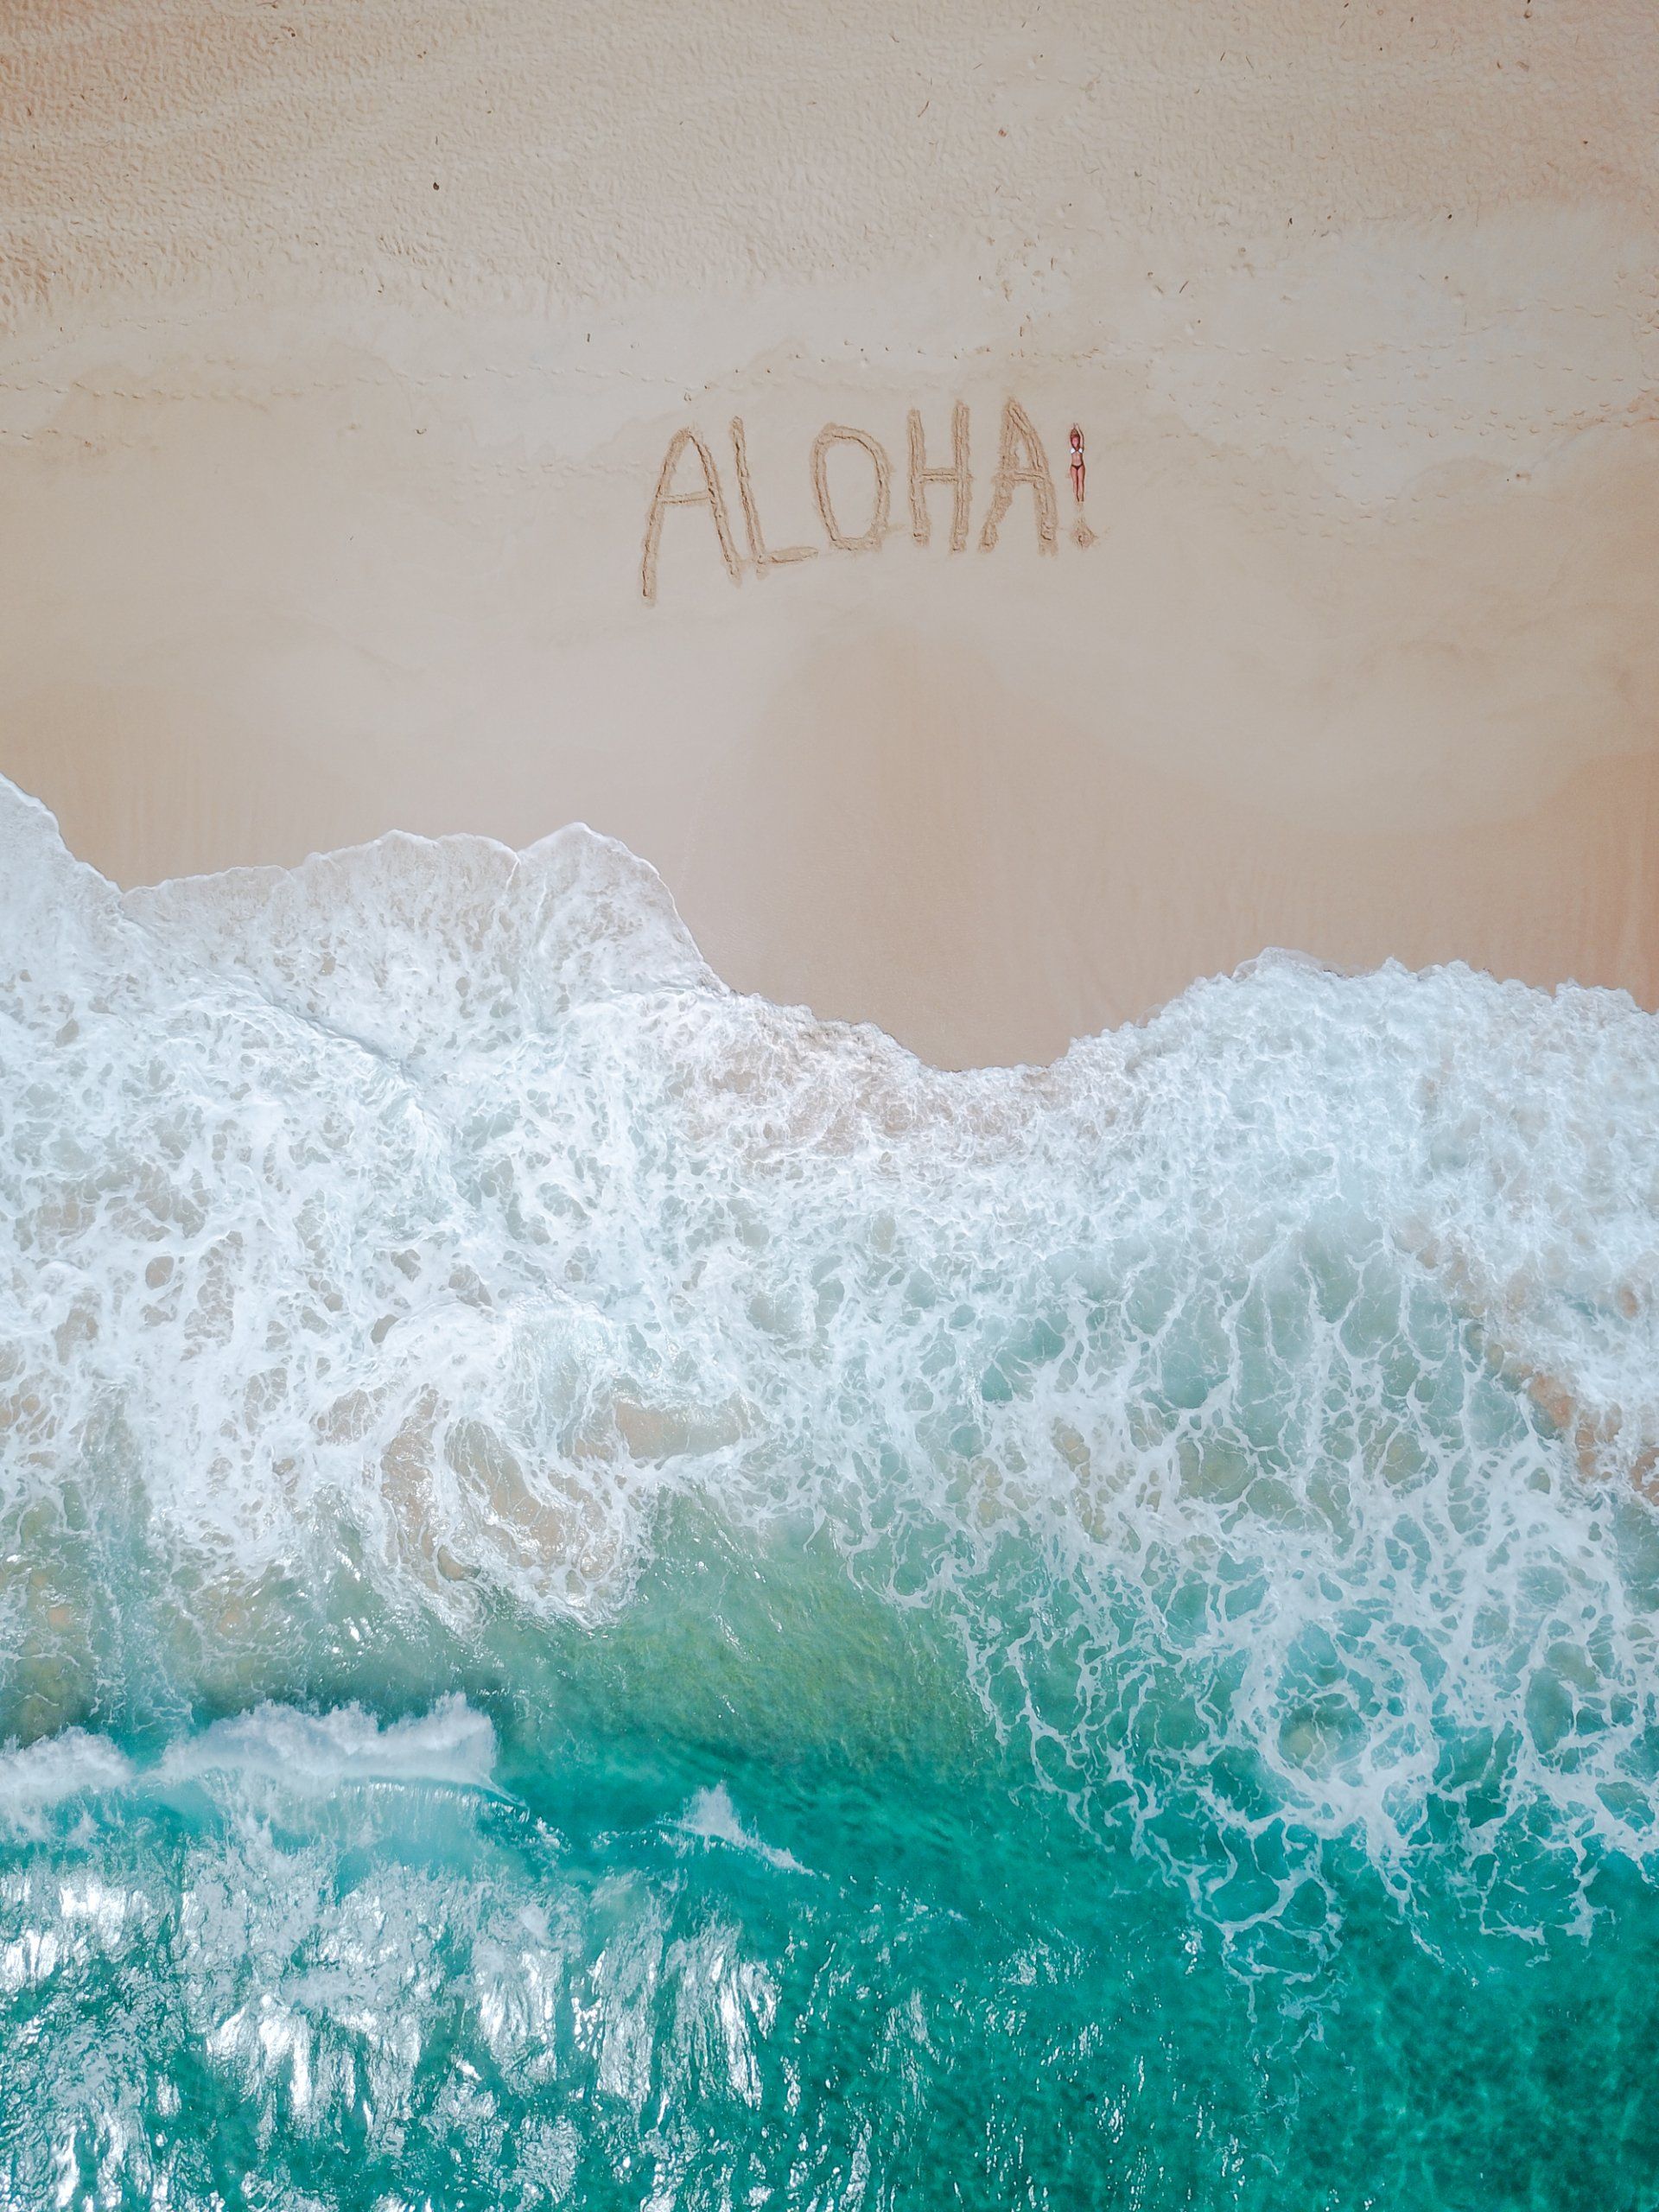 The word aloha is written in the sand on the beach.